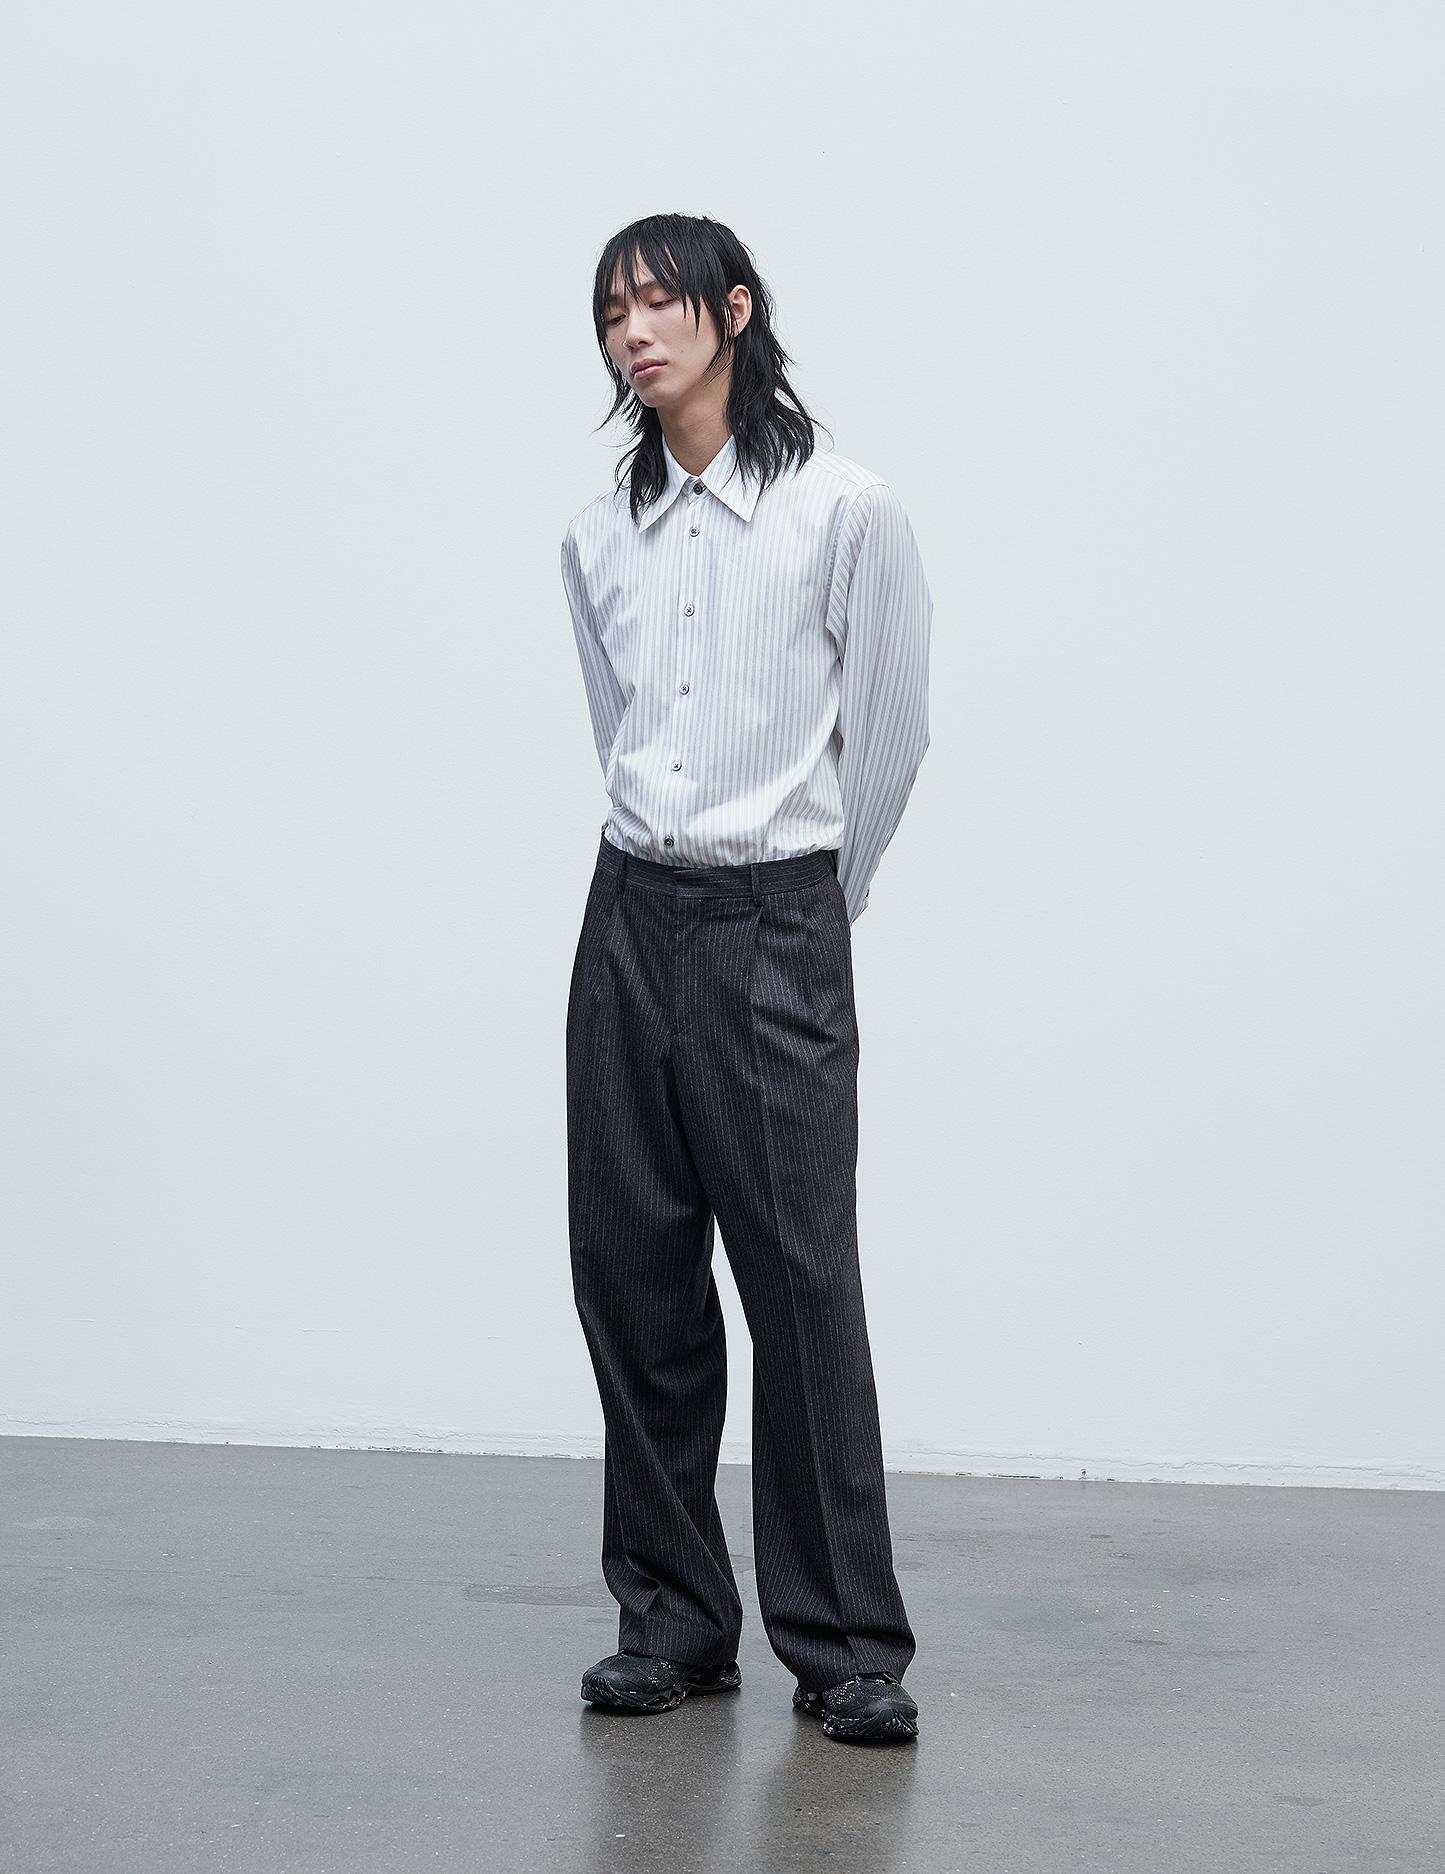 WIDE PLEATED TROUSER . ANTRACITE